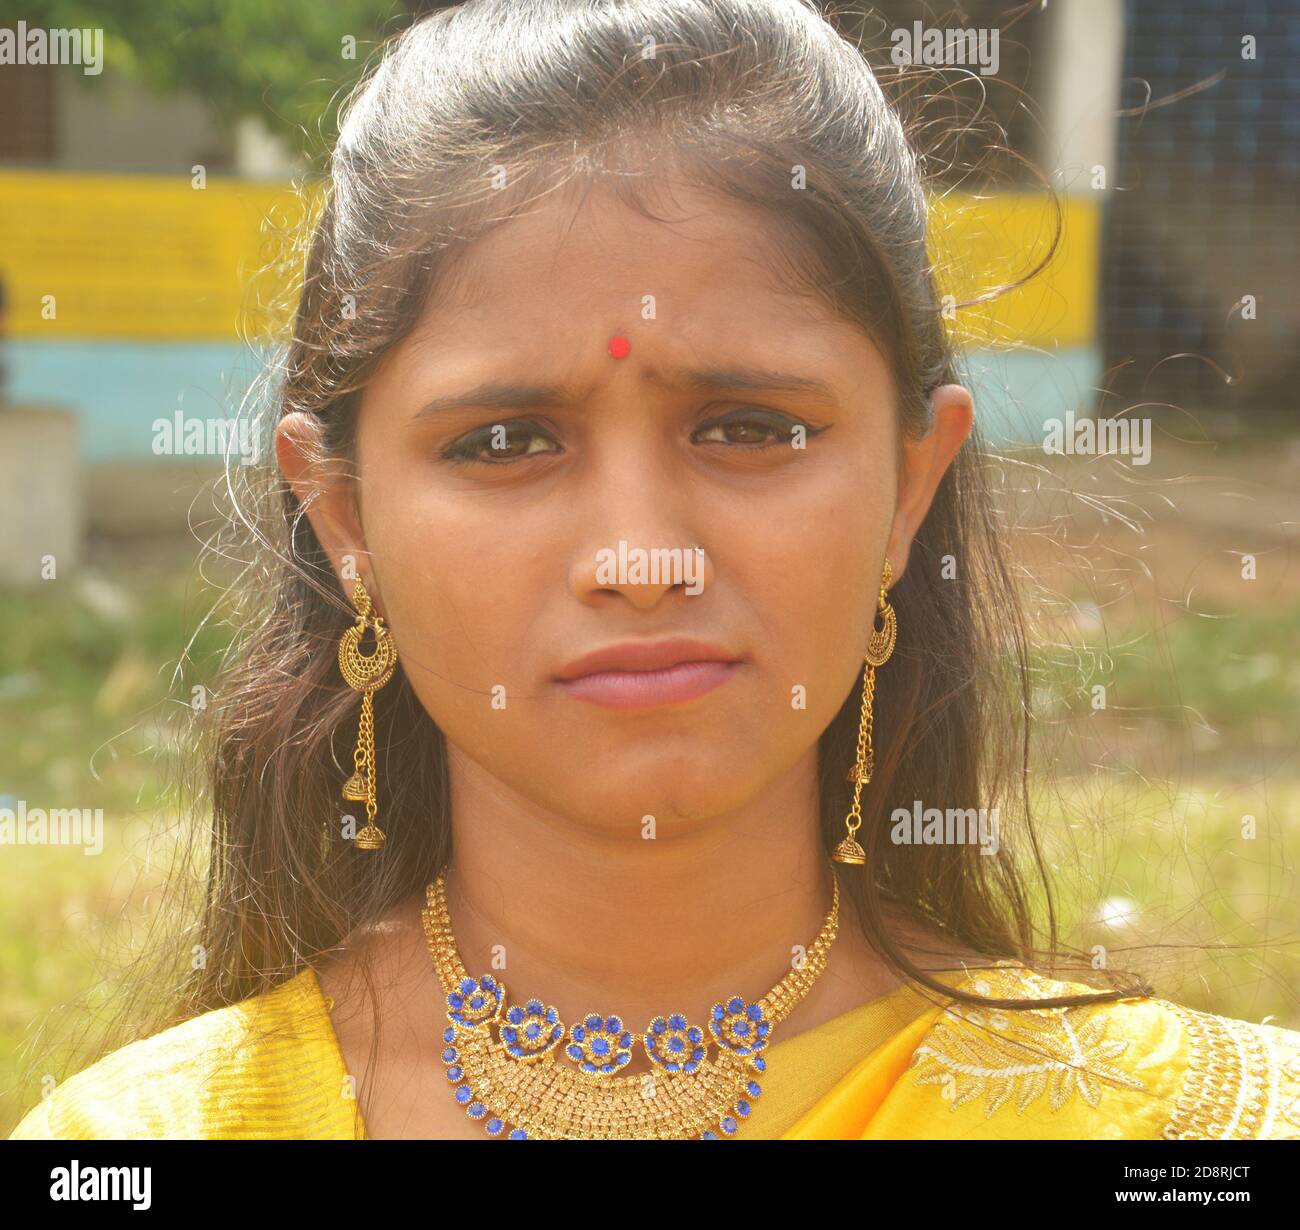 Close up of  Indian Bengali teenage girl wearing traditional Indian saree with golden jewellery erring necklace and bindi on forehead, selective focus Stock Photo